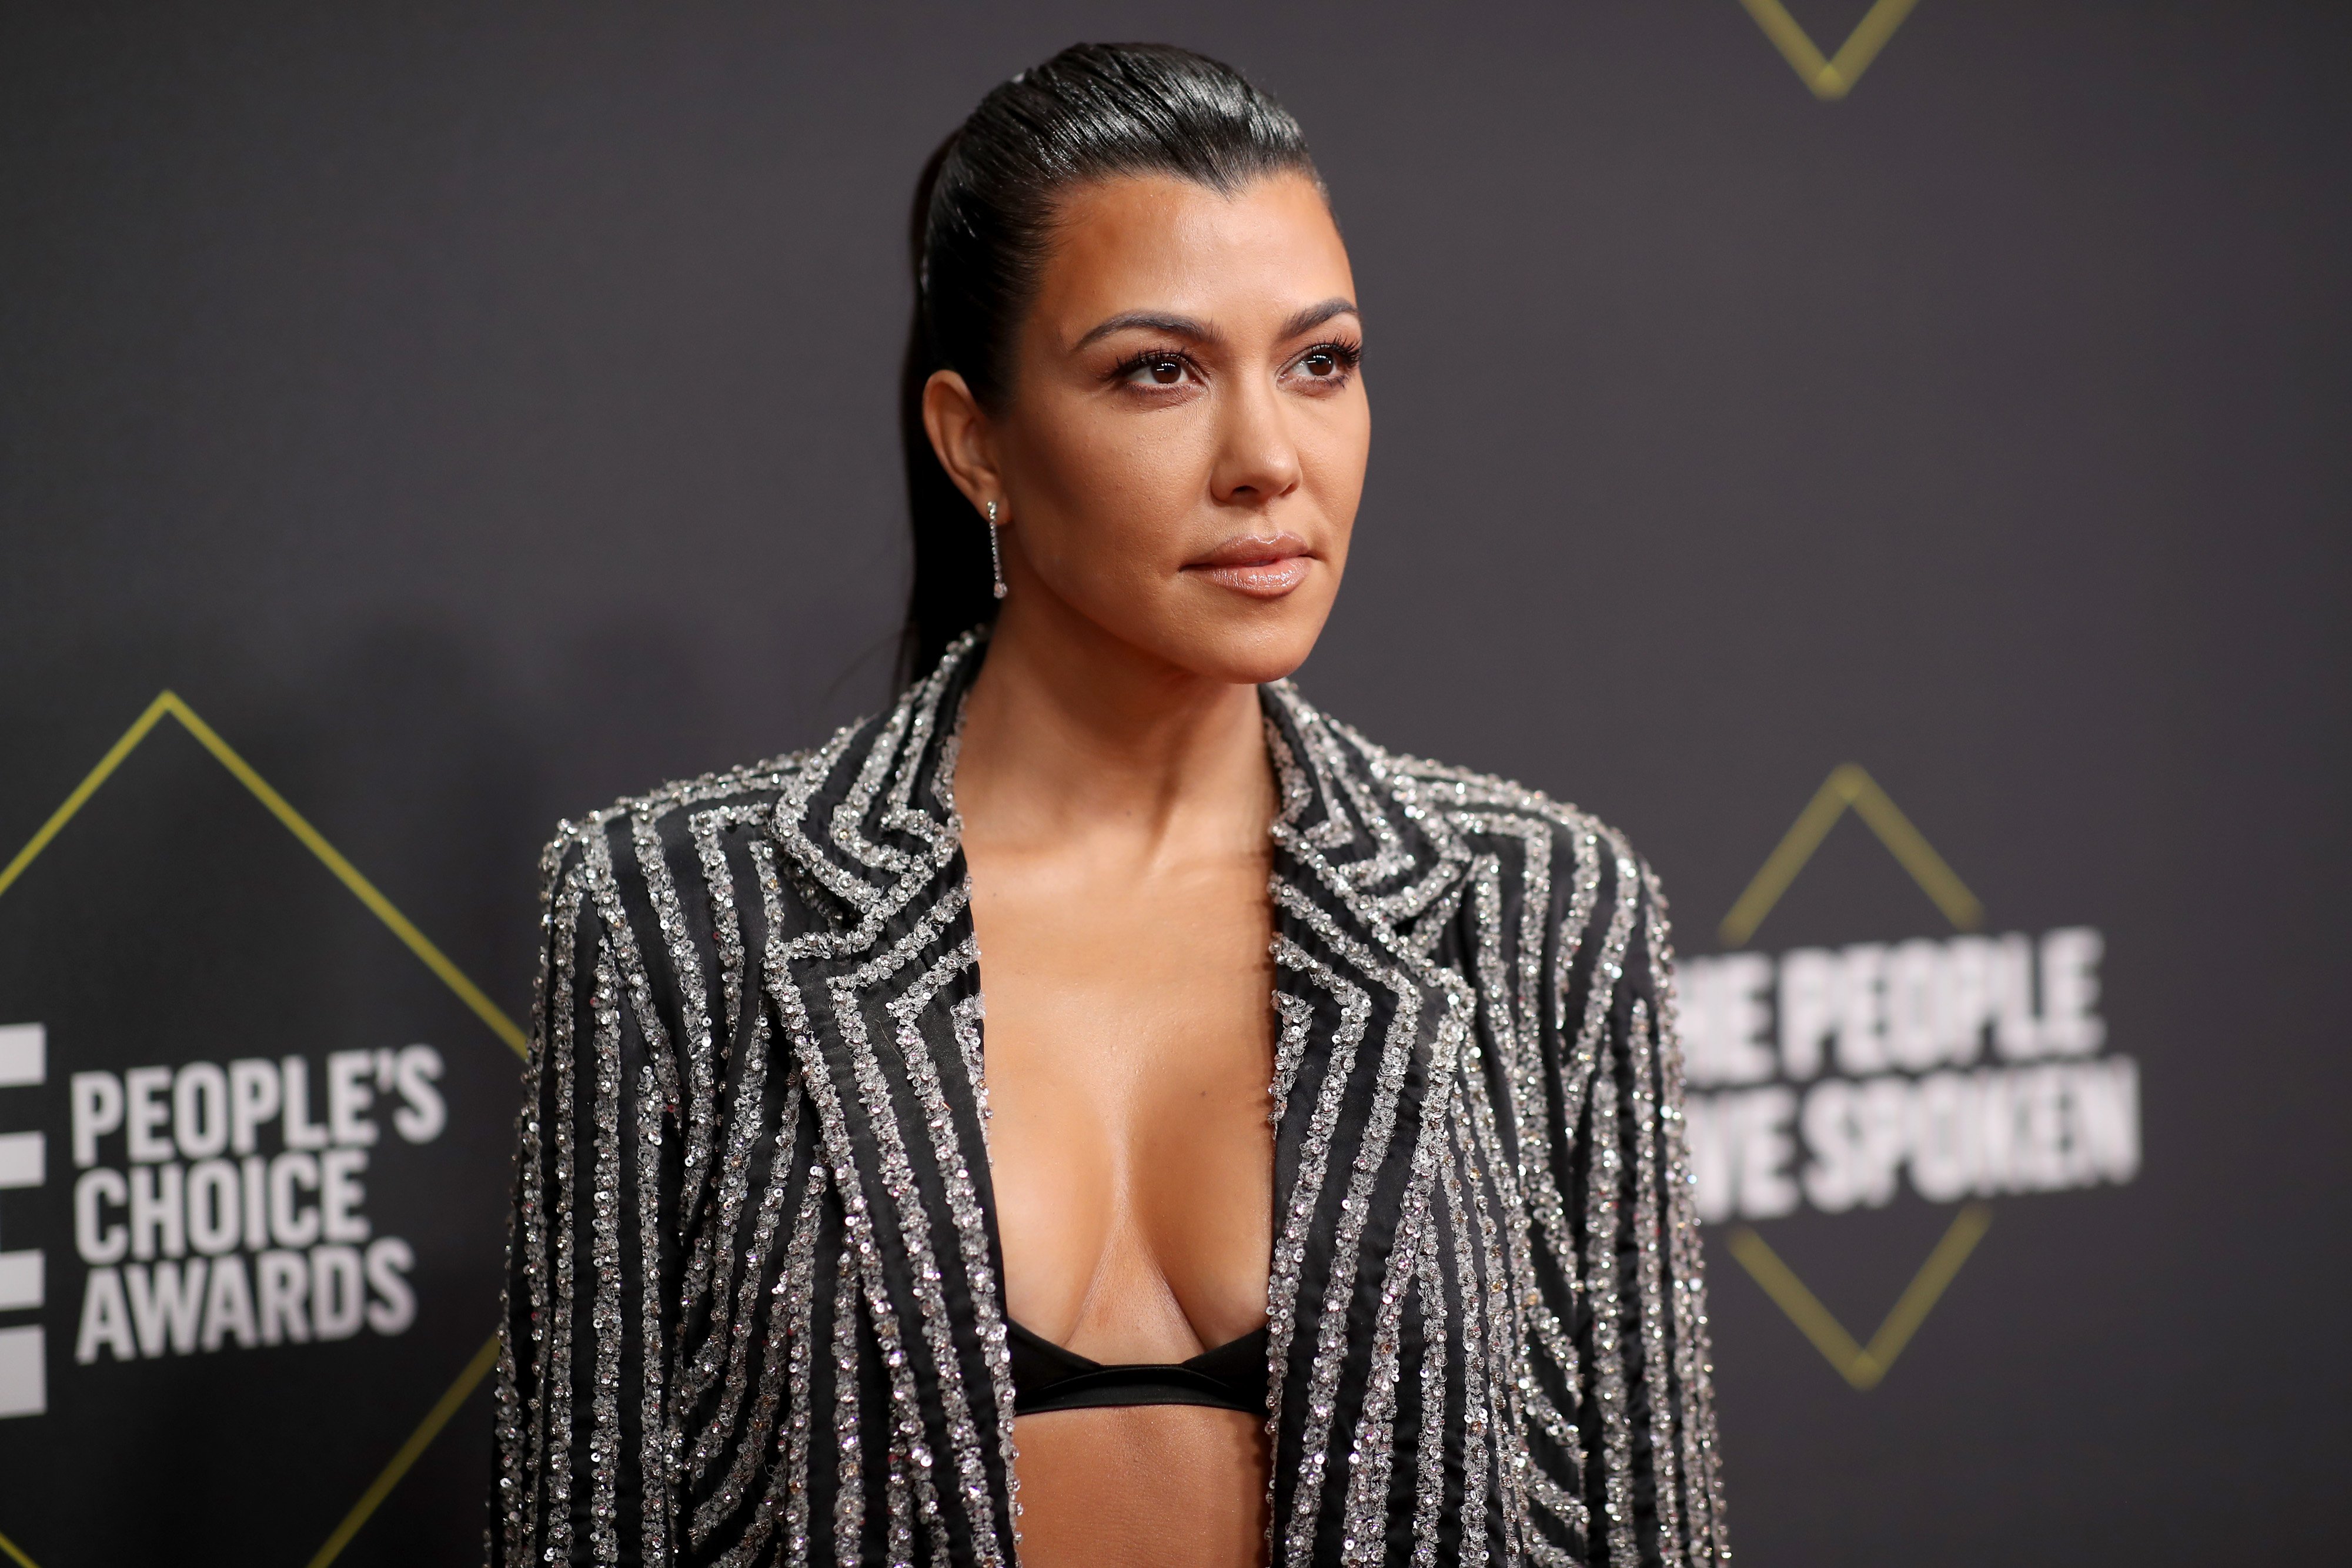 Kourtney Kardashian arrives to the 2019 E! People's Choice Awards held at the Barker Hangar on November 10, 2019 | Photo: Getty Images